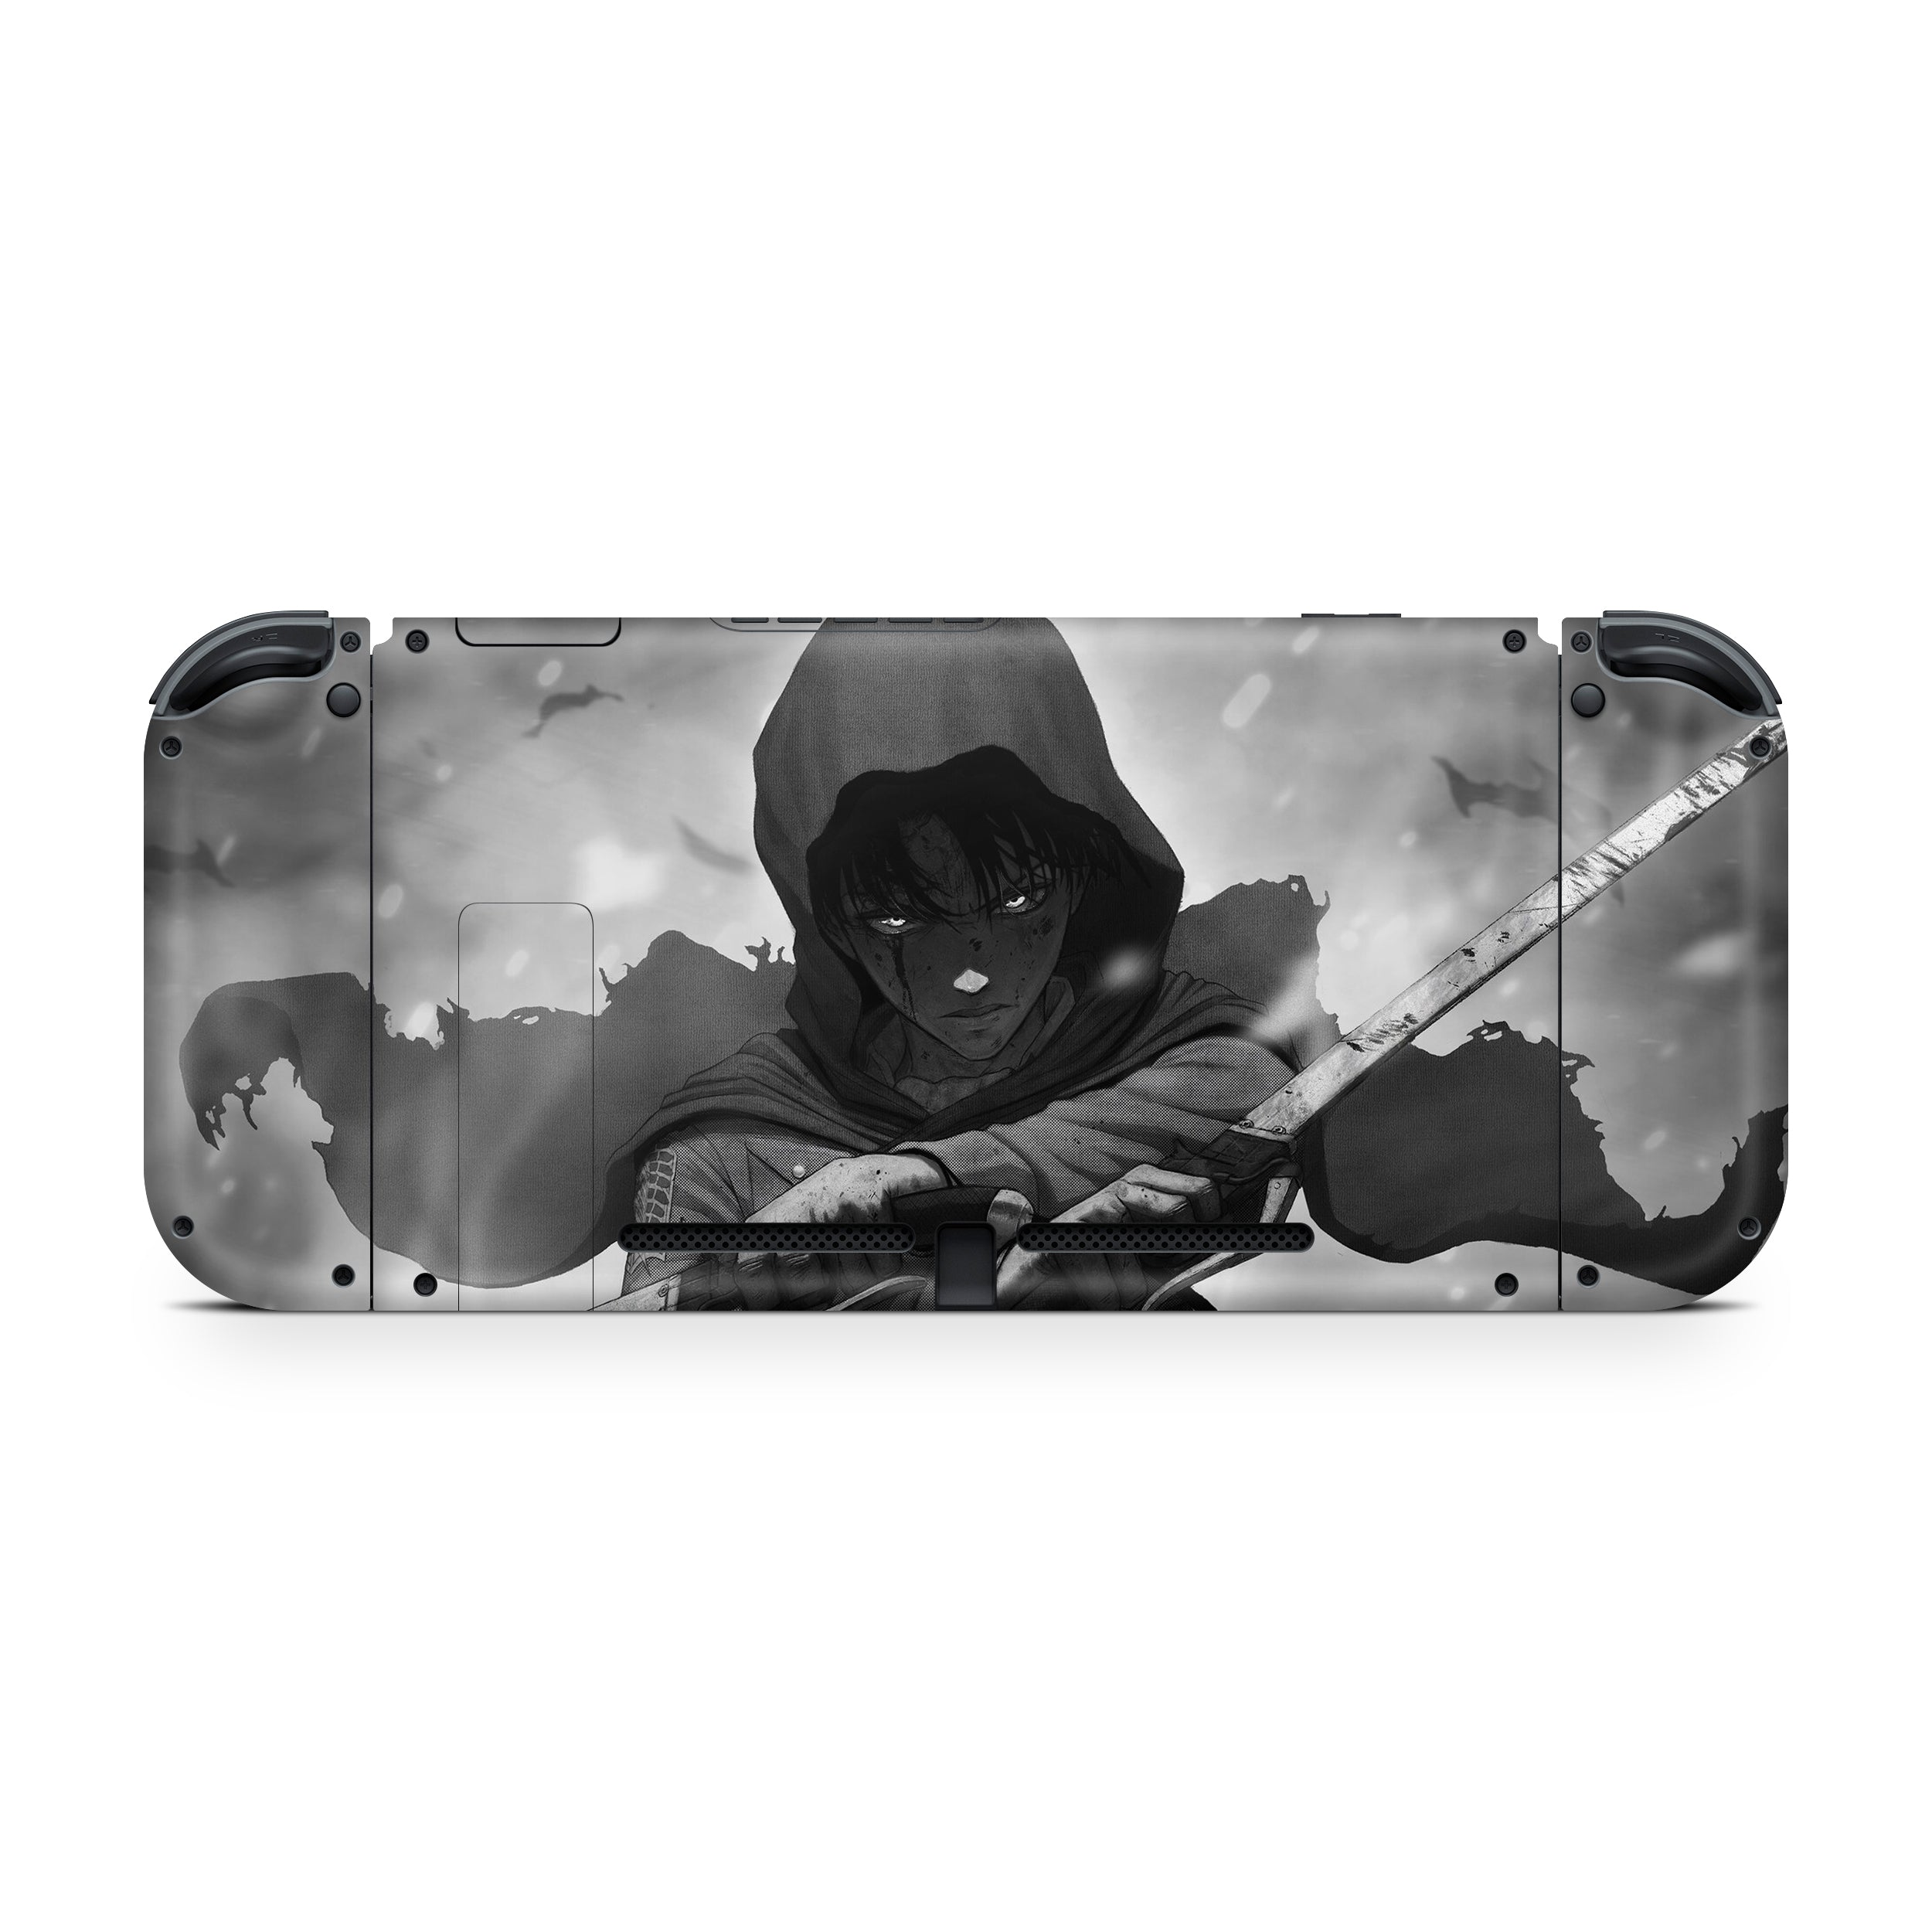 A video game skin featuring a Attack On Titan Levi Ackerman design for the Nintendo Switch.